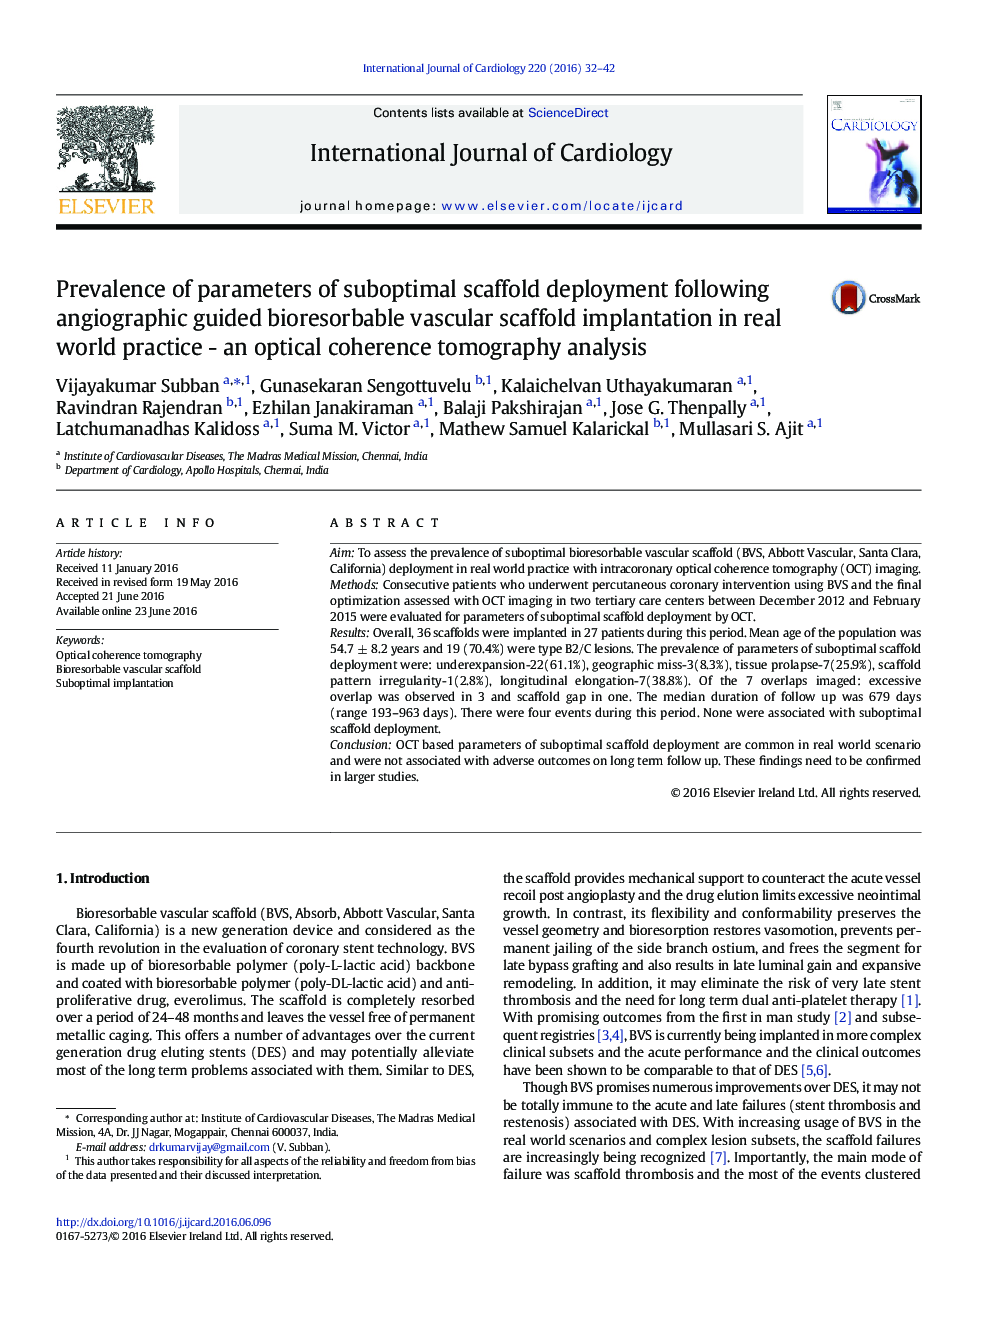 Prevalence of parameters of suboptimal scaffold deployment following angiographic guided bioresorbable vascular scaffold implantation in real world practice - an optical coherence tomography analysis